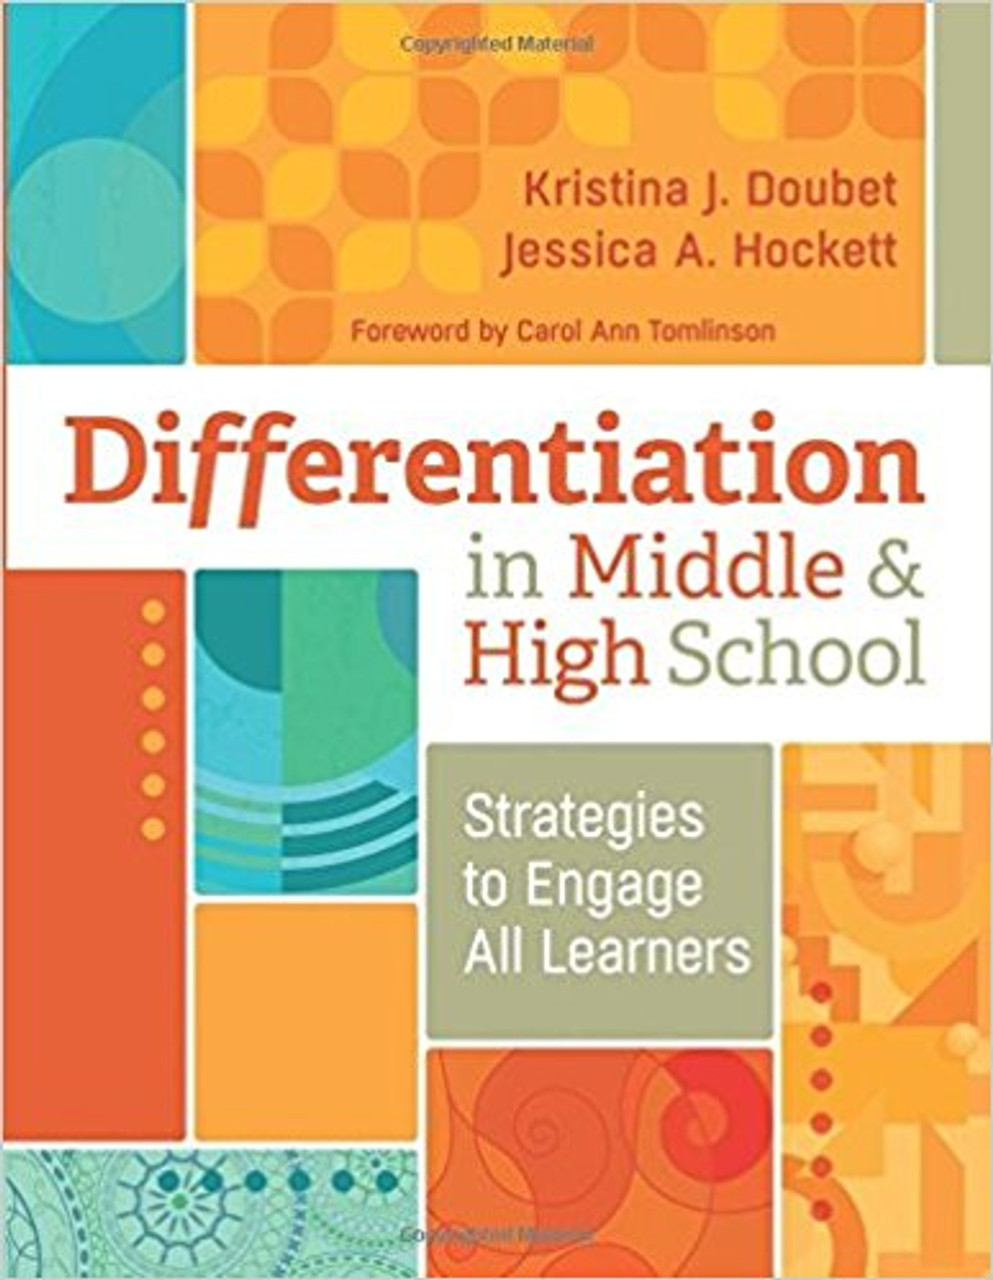 In this one-stop resource for middle and high school teachers, Kristina J. Doubet and Jessica A. Hockett explore how to use differentiated instruction to help students be more successful learners--regardless of background, native language, learning style, motivation, or school savvy. They explain how to * Create a healthy classroom community in which students' unique qualities and needs are as important as the ones they have in common. * Translate curriculum into manageable and meaningful learning goals that are fit to be differentiated. * Use pre-assessment and formative assessment to uncover students' learning needs and tailor tasks accordingly. * Present students with avenues to take in, process, and produce knowledge that appeal to their varied interests and learning profiles. * Navigate roadblocks to implementing differentiation. Each chapter provides a plethora of practical tools, templates, and strategies for a variety of subject areas developed by and for real teachers.